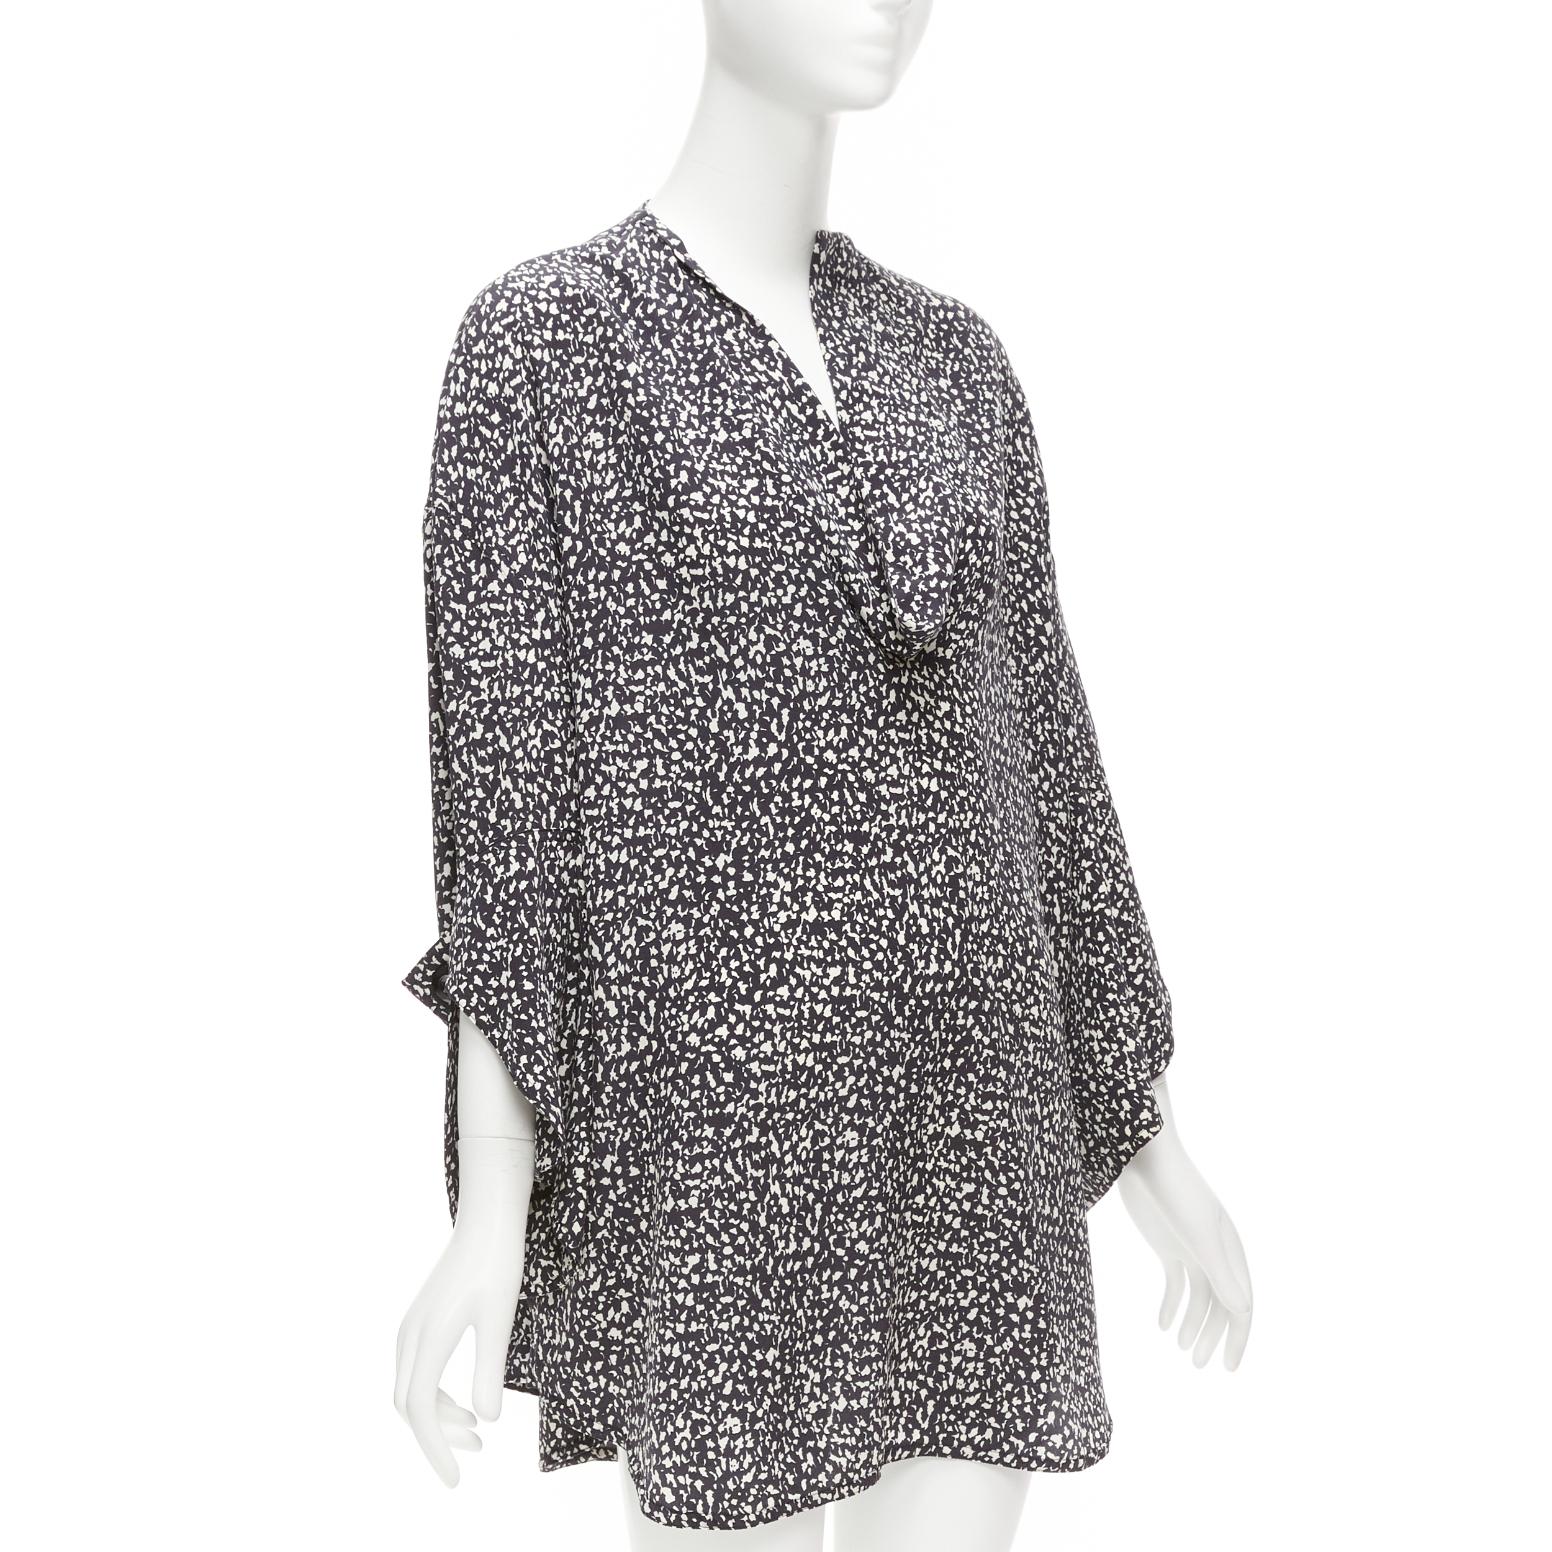 MARNI 100% silk black white speckle print asymmetric neck shirt dress IT40 S
Reference: CELG/A00416
Brand: Marni
Material: Silk
Color: Black, White
Pattern: Abstract
Closure: Pullover
Extra Details: Adjustable cuffs.
Made in: